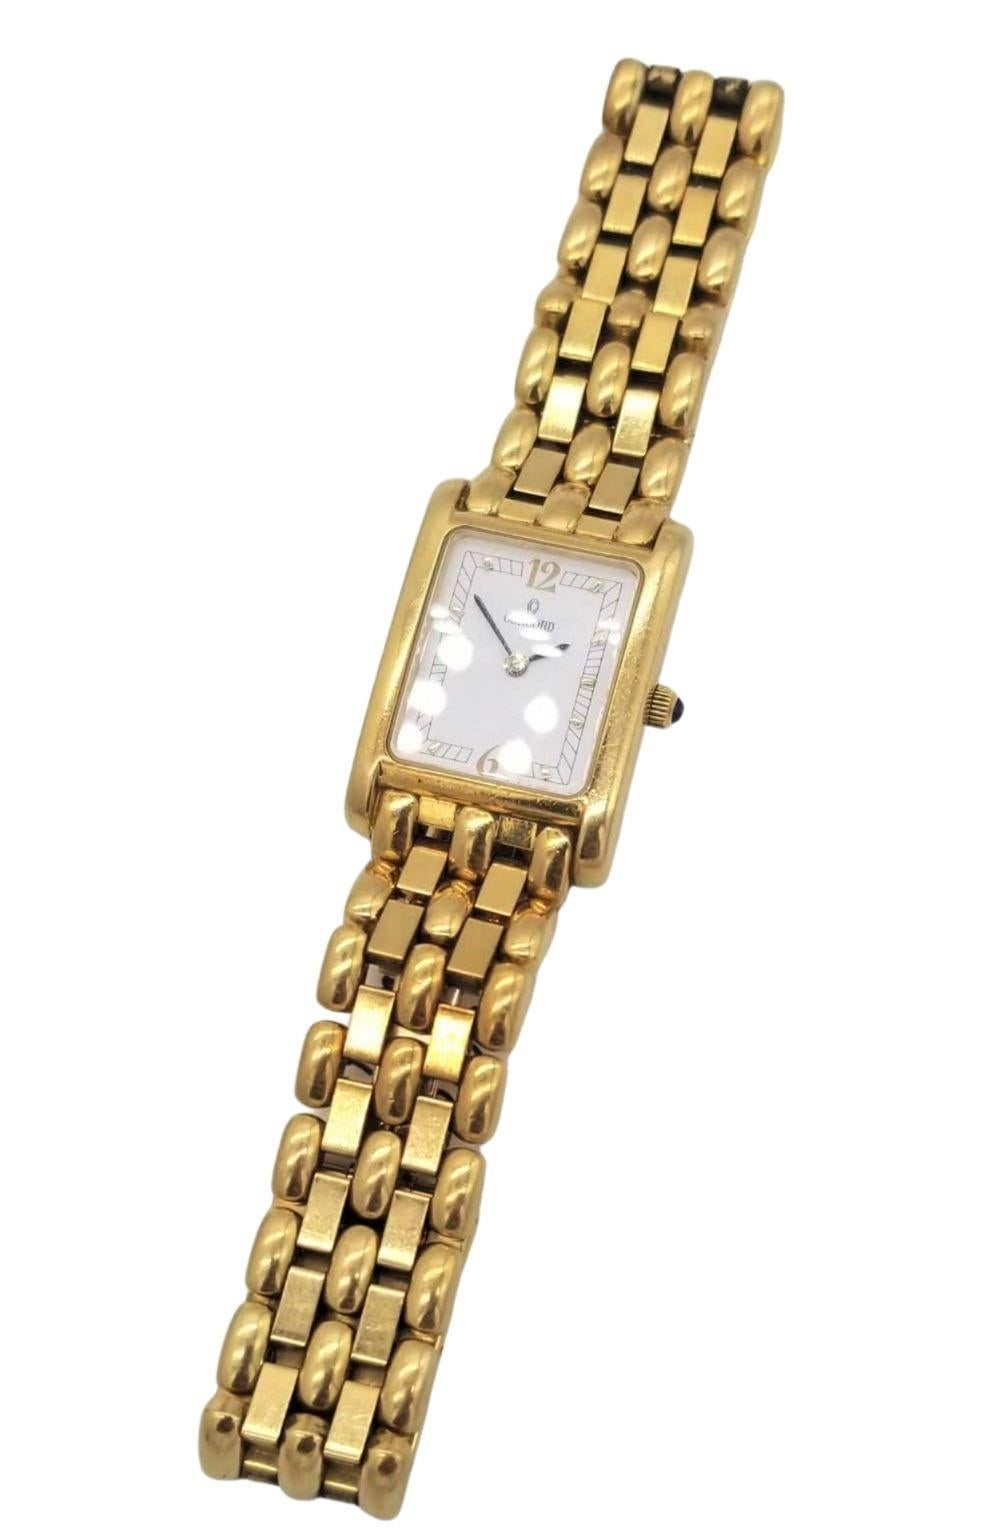 Concord Venetto 18K Gold Ladies Wristwatch with Concord Certifications and weighs 38.5 DWT. The 19mm by 21mm case houses a quartz movement, while the white dial features index markers. It comes on an 18K yellow gold link bracelet that measures 6.25